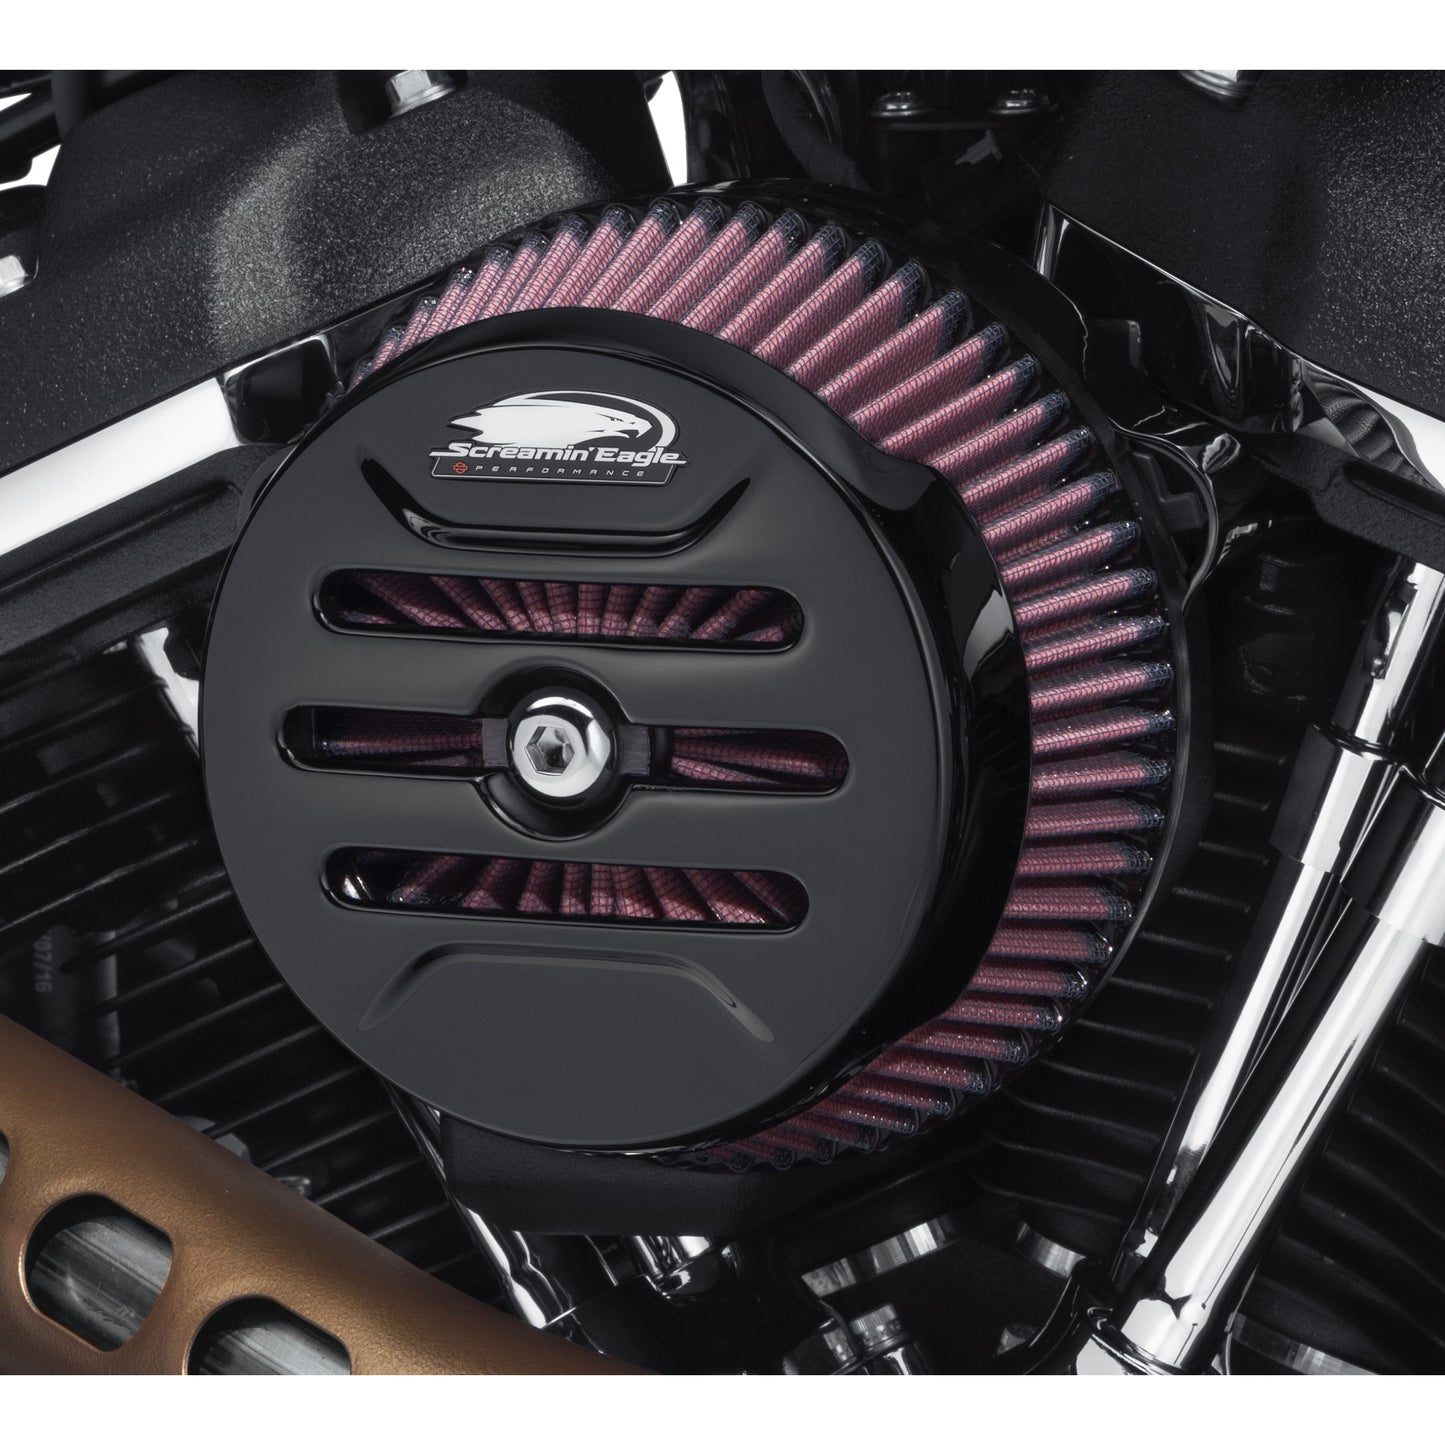 Harley-Davidson® Screamin' Eagle Round Air Cleaner Cover - Calibre